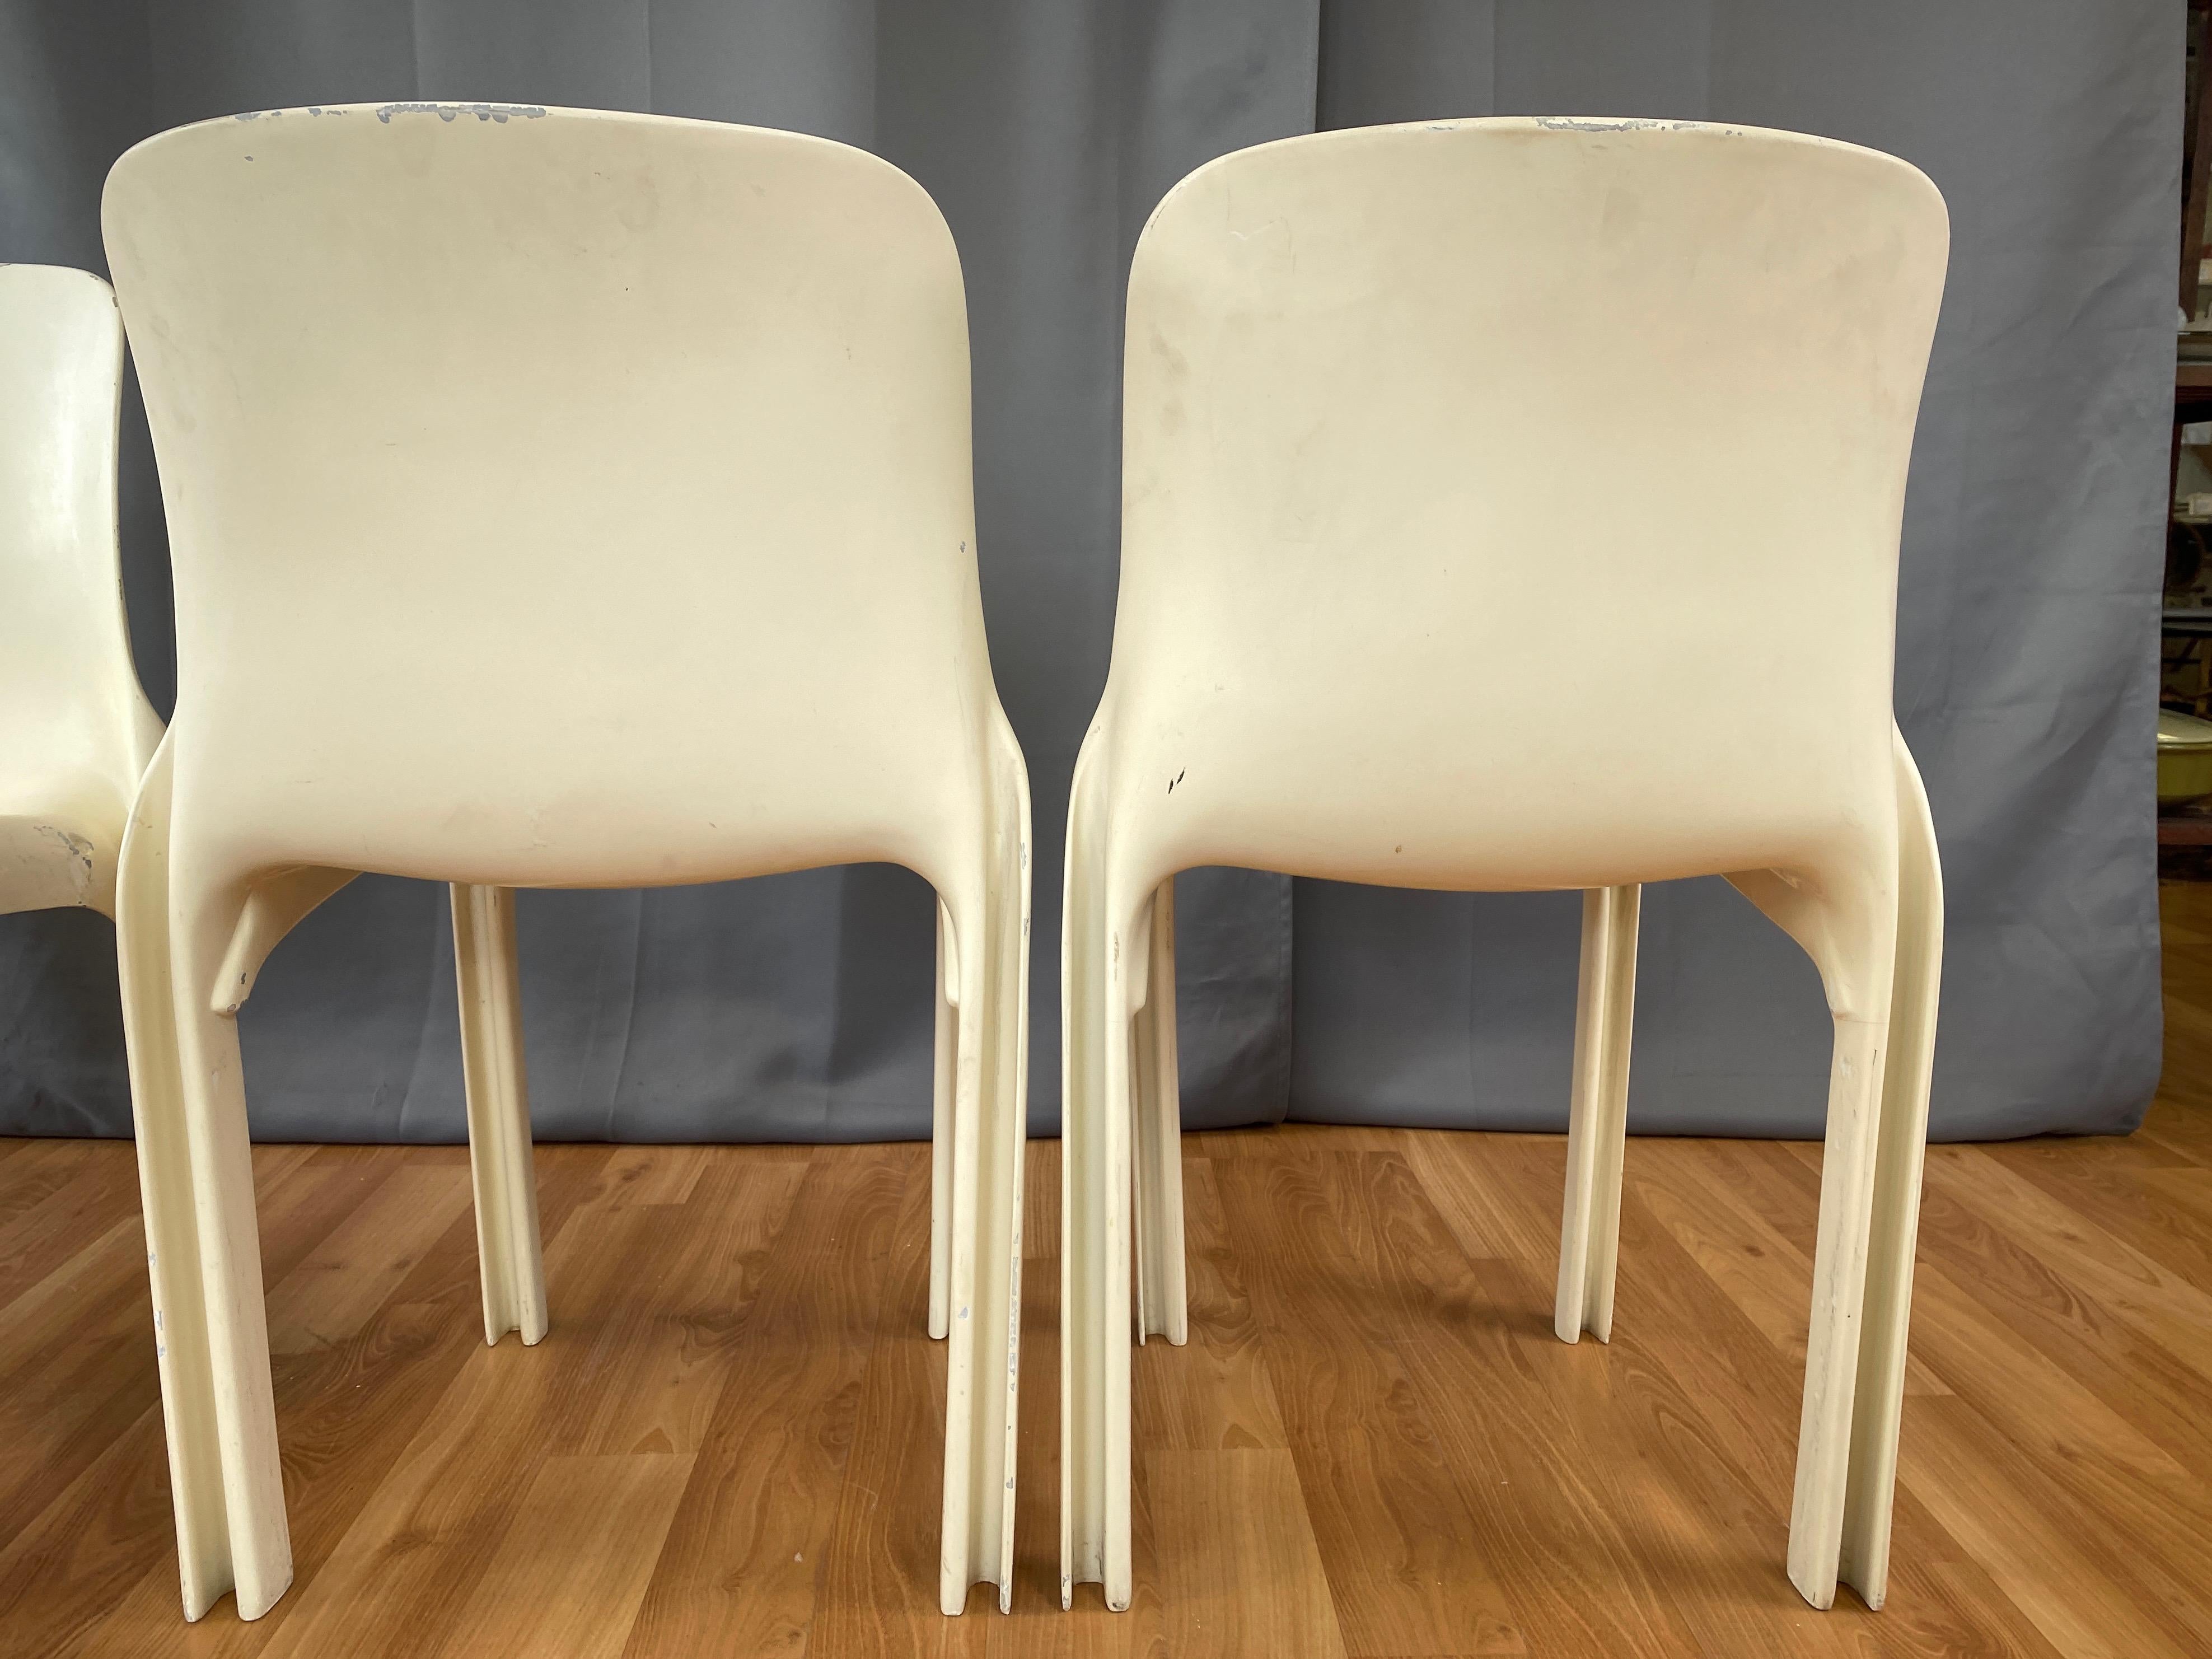 Resin Set of Four Vico Magistretti for Artemide Early White Selene Chairs, 1968